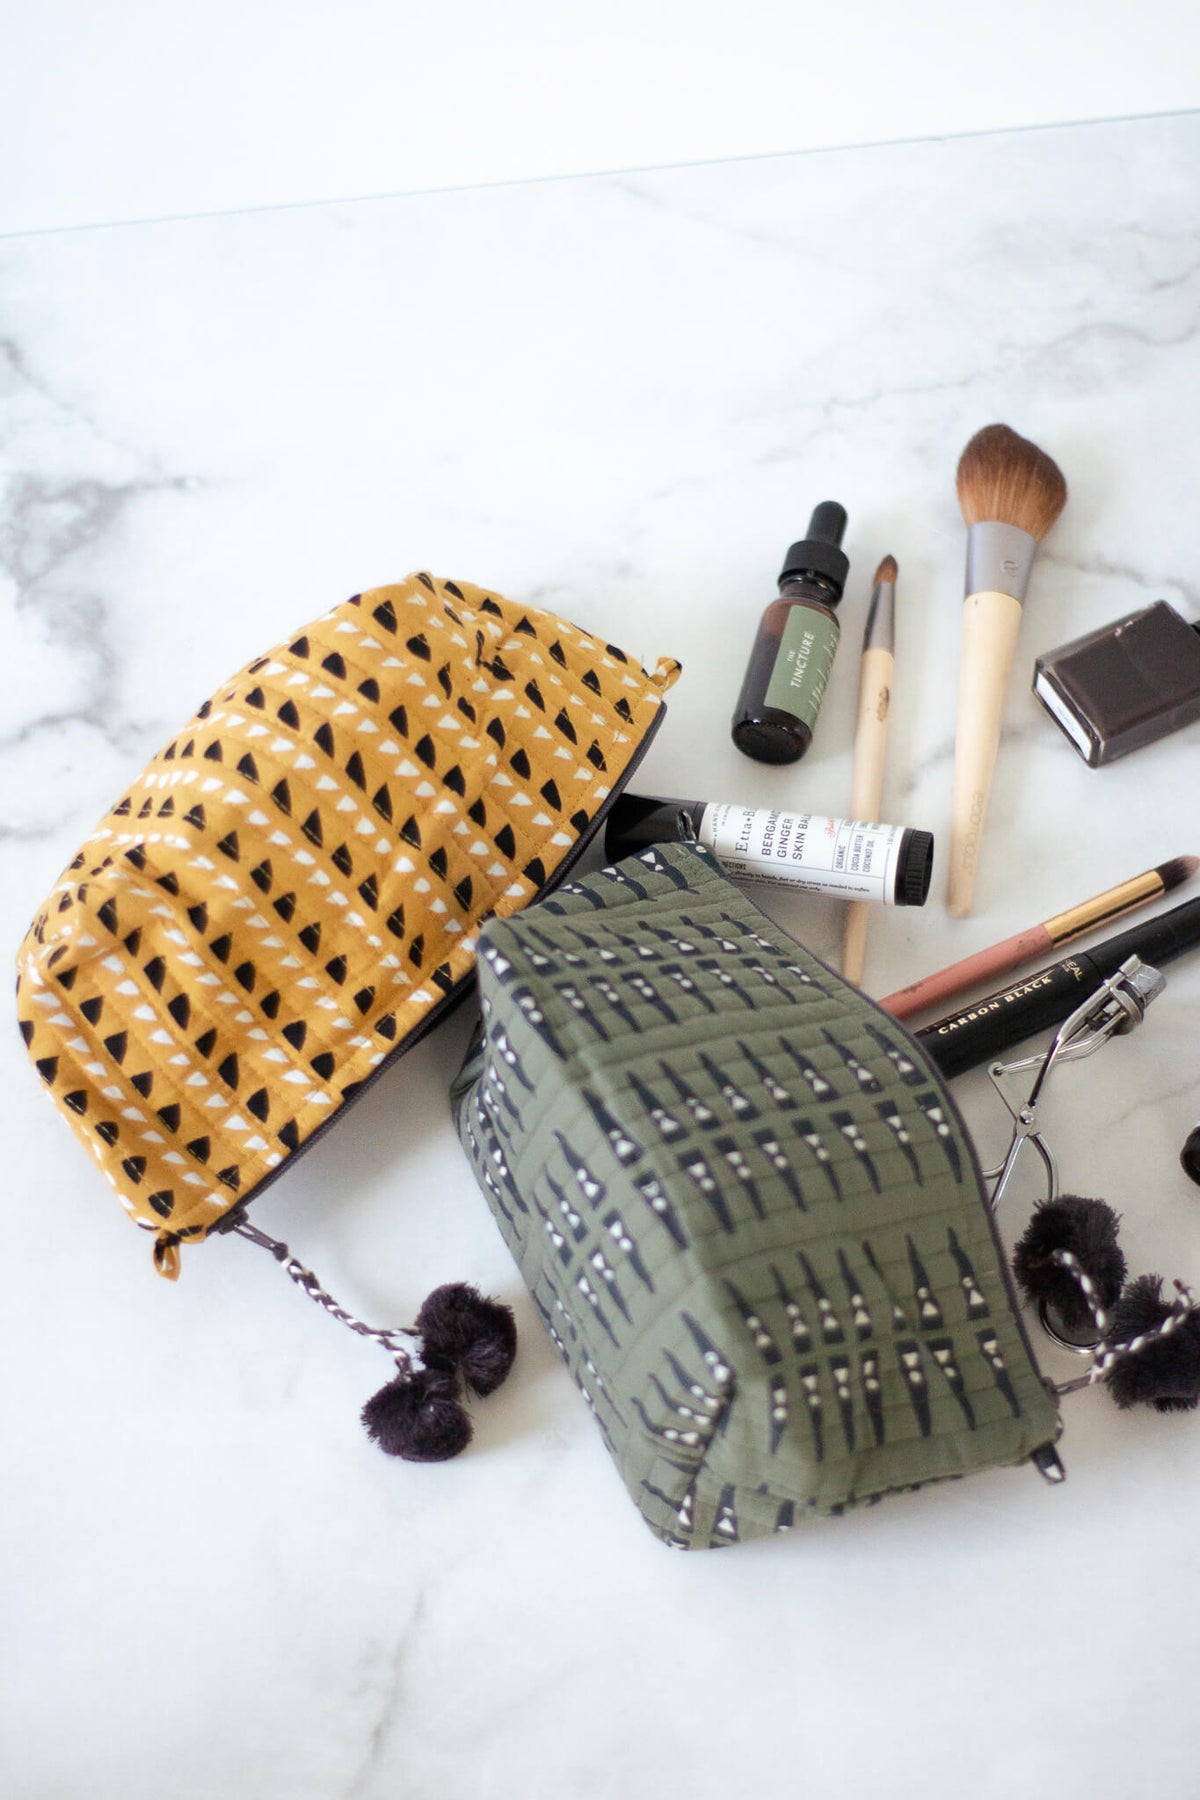 Gray Market Block Printed Makeup Pouch